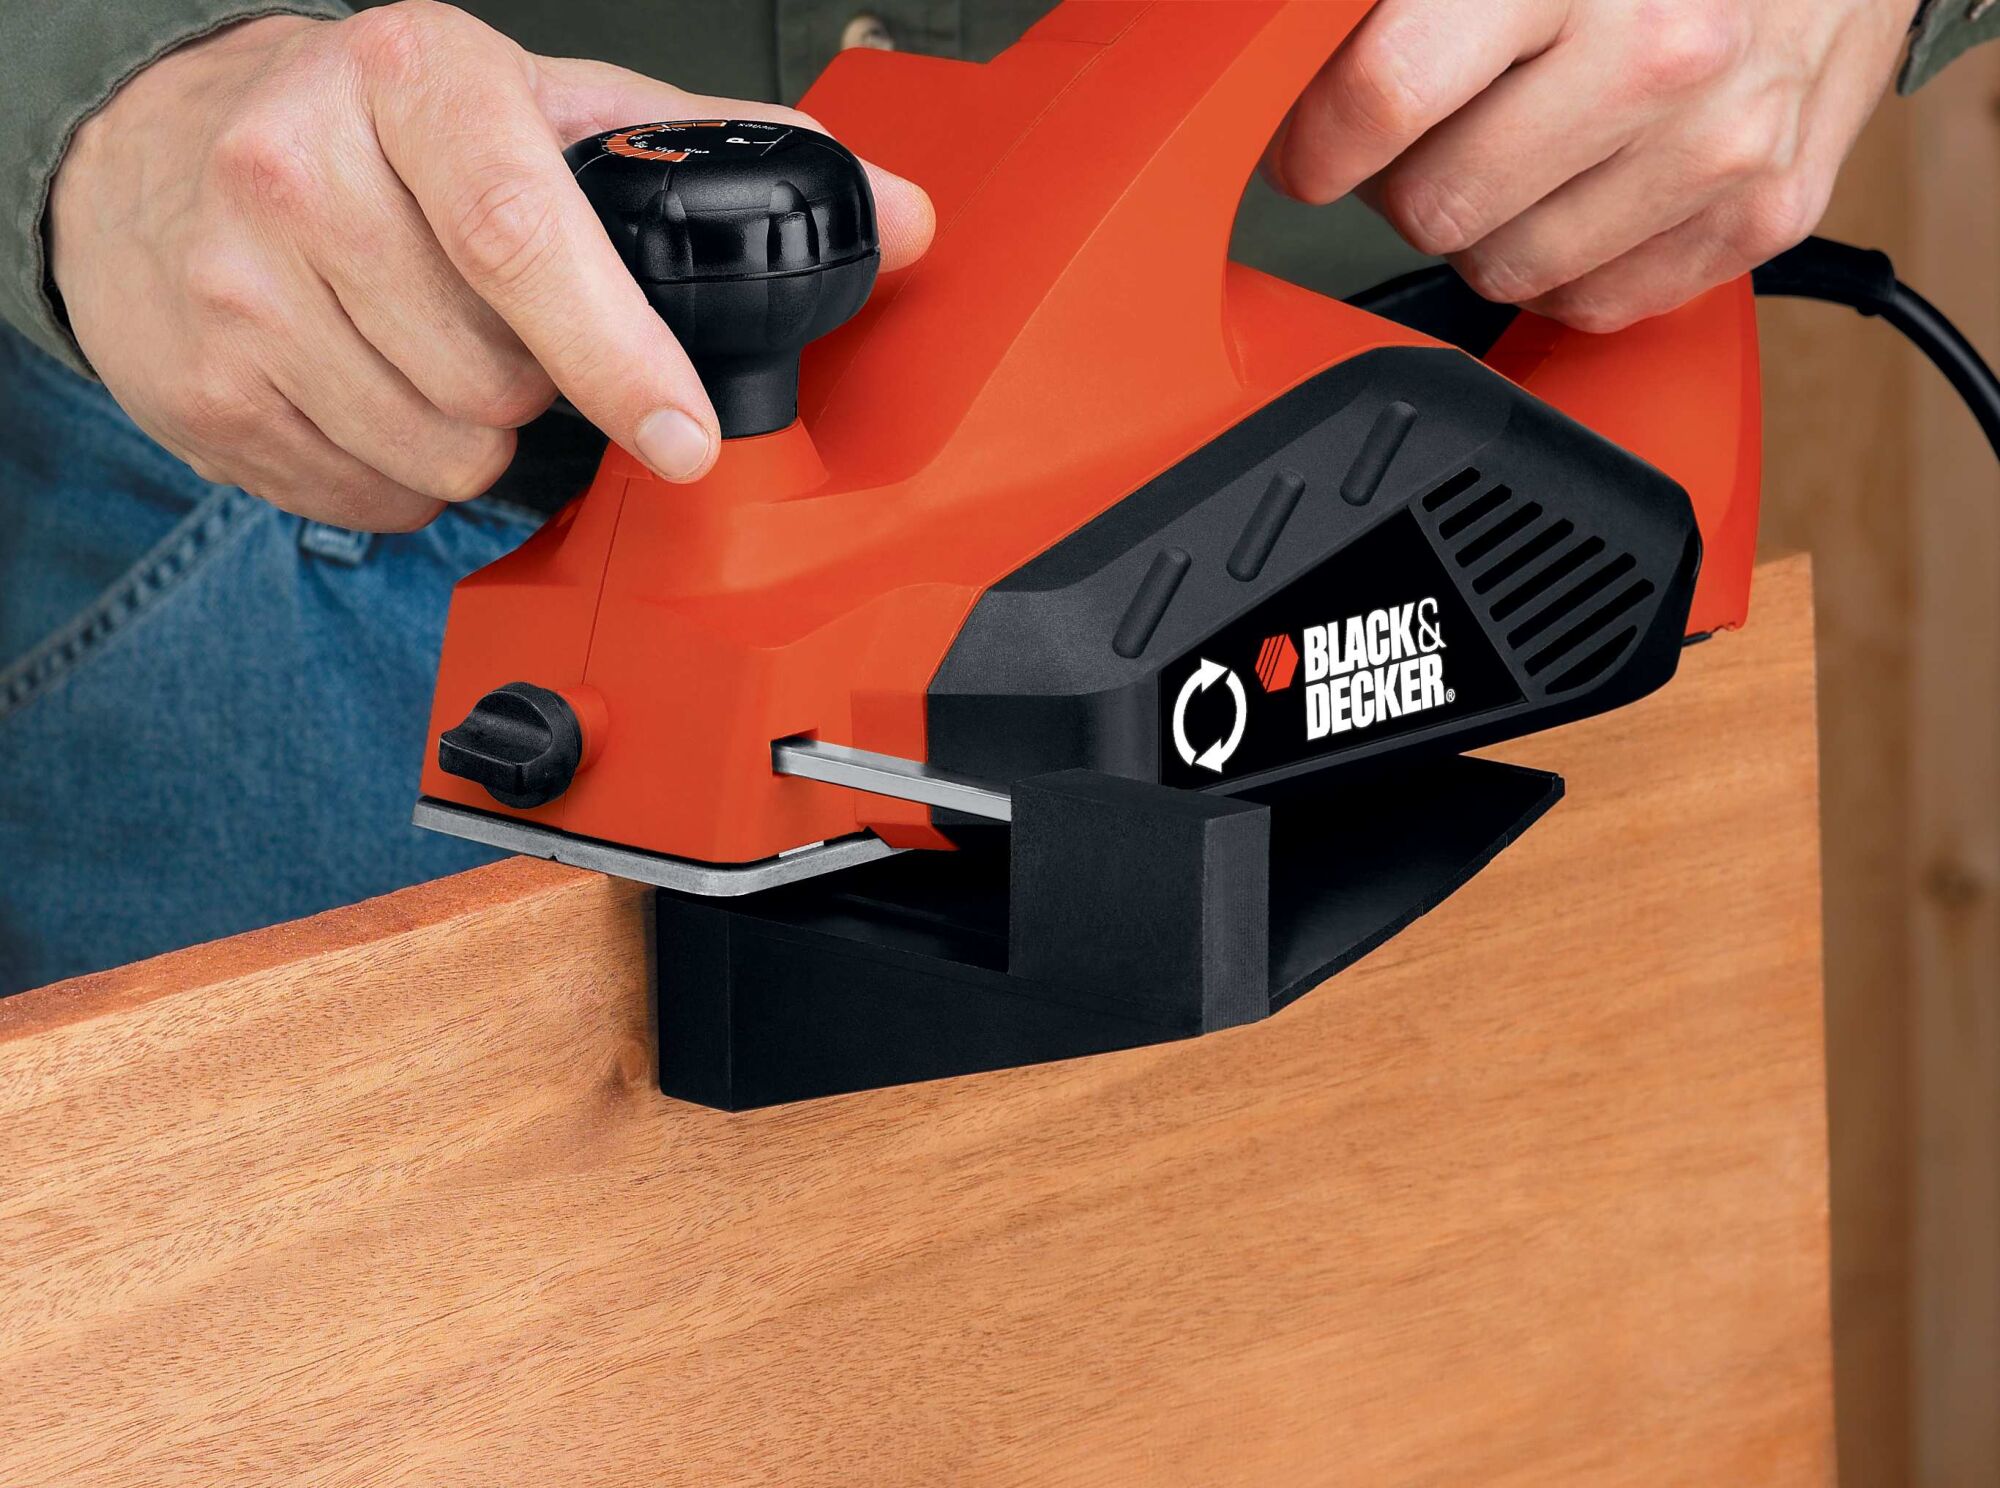 5.2 Ampere planer being used by a person to smooth out wooden edges.